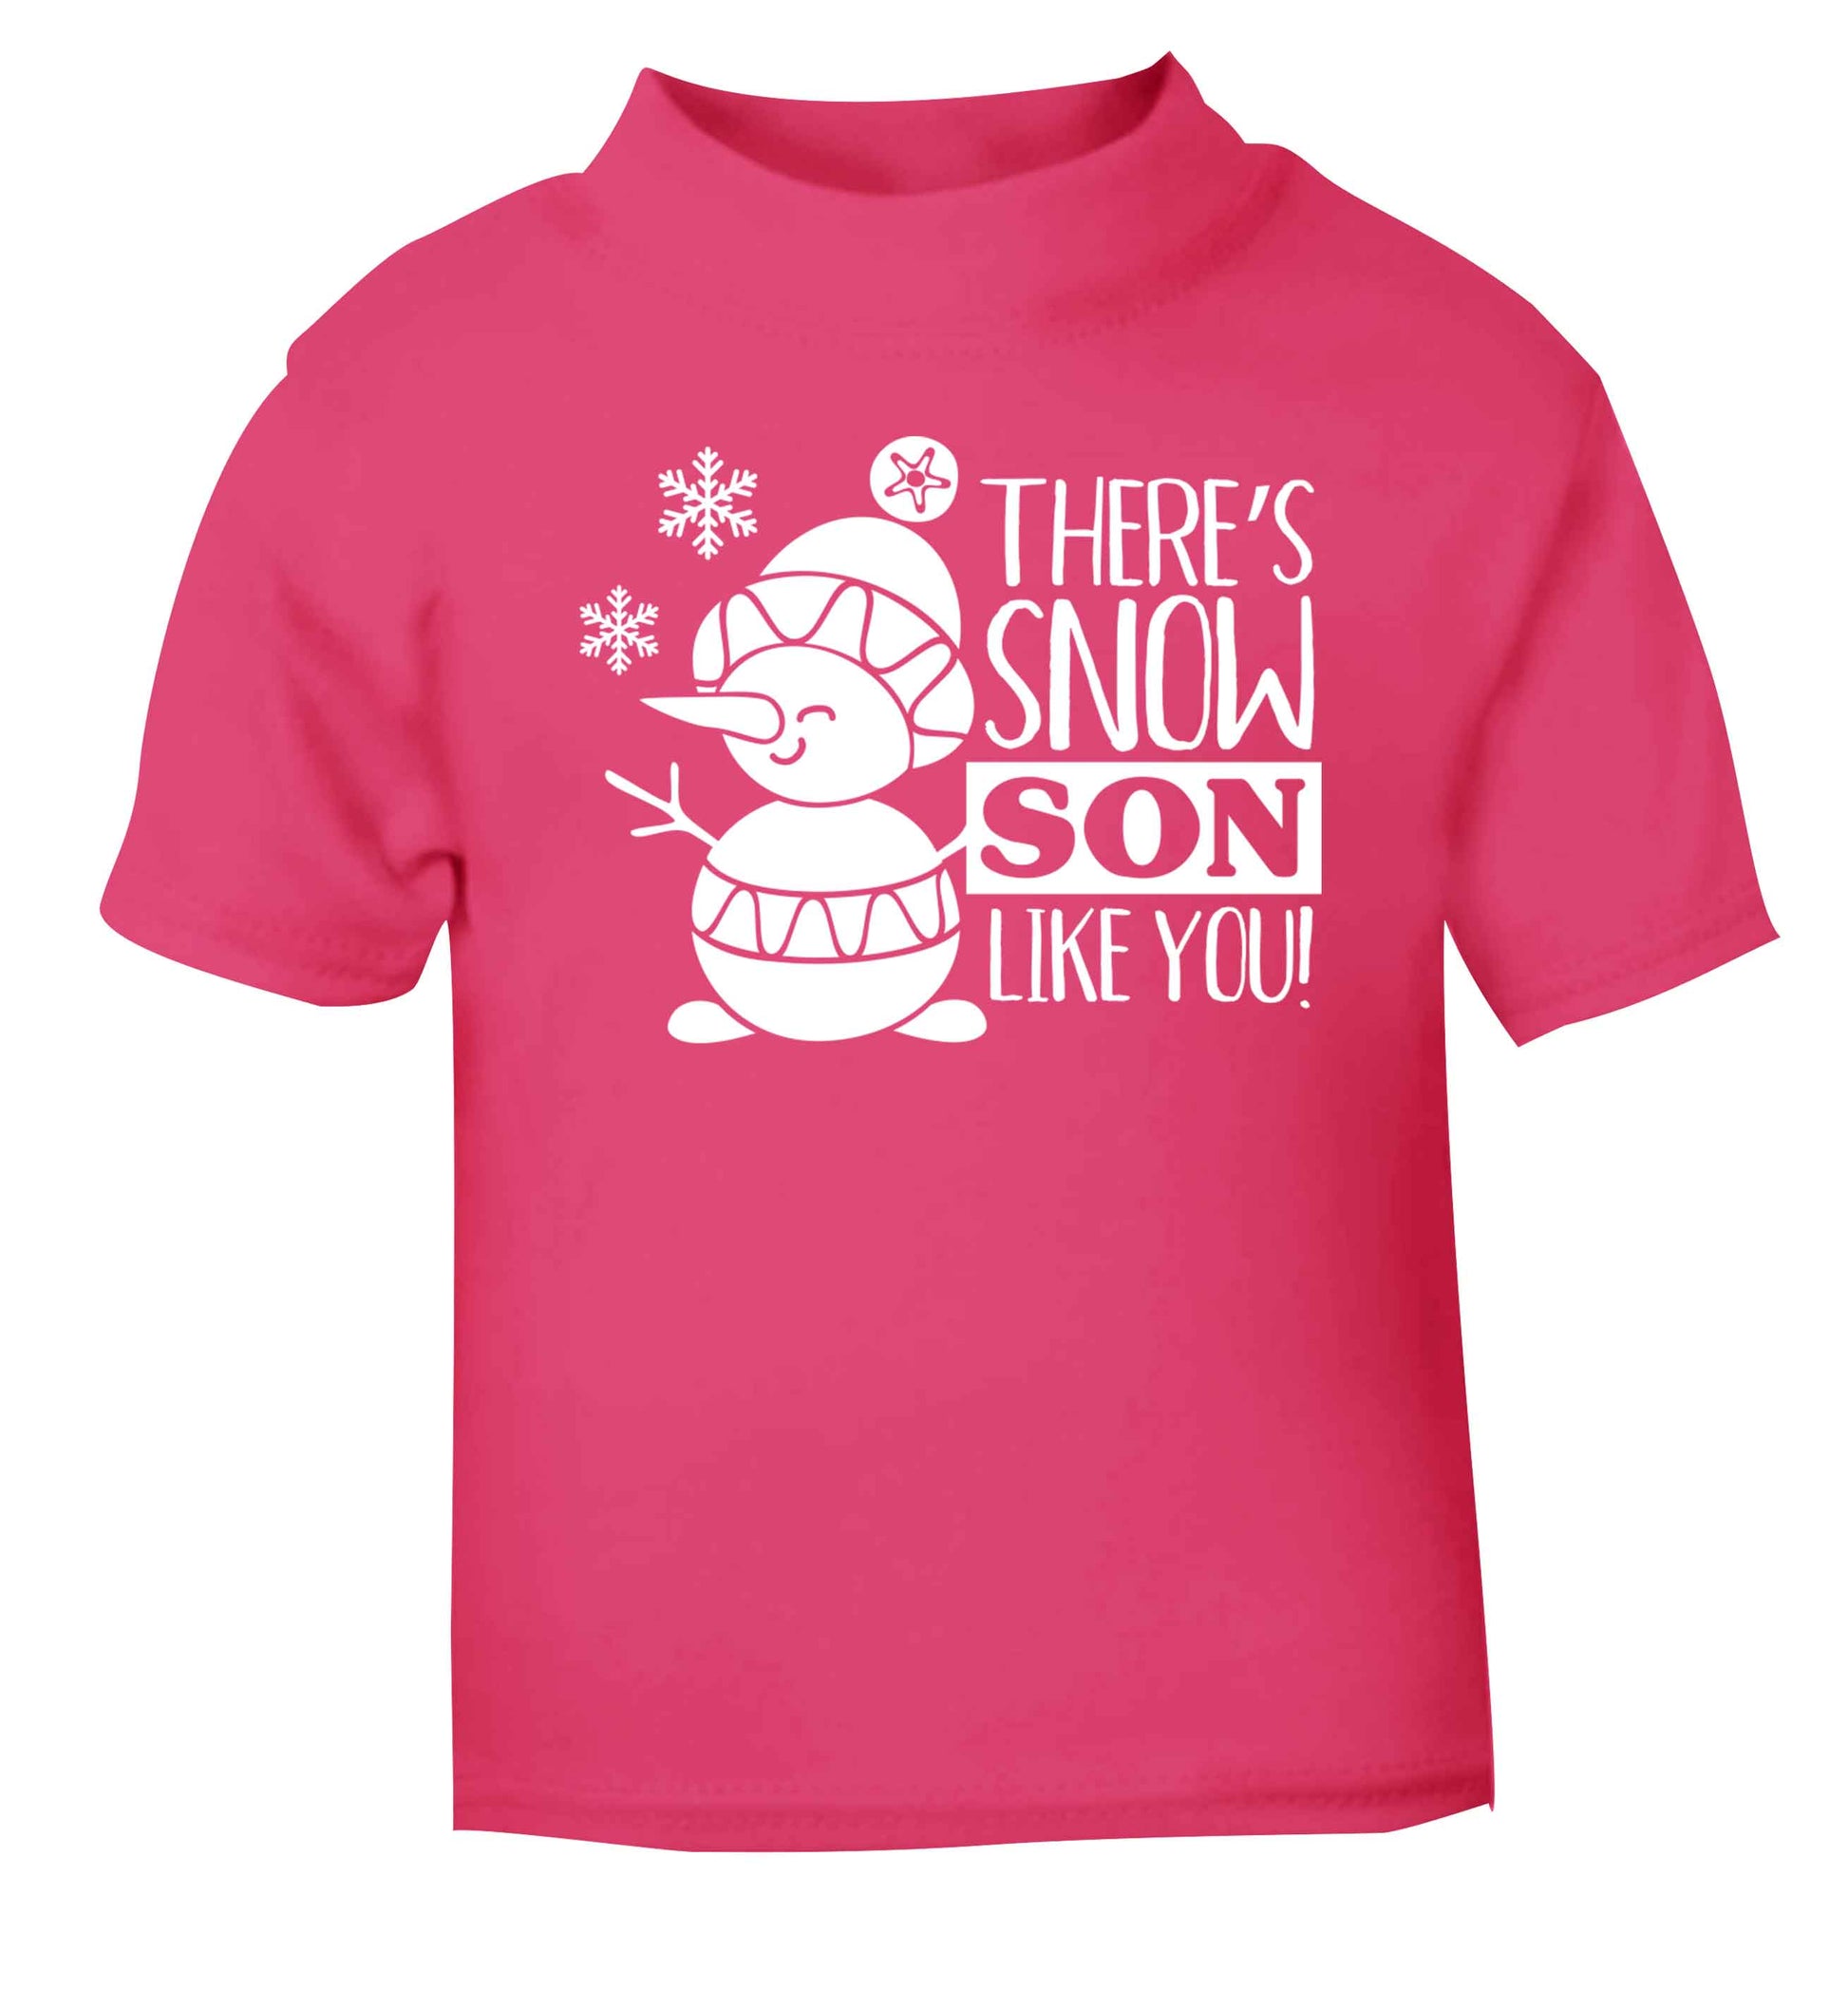 There's snow son like you pink baby toddler Tshirt 2 Years